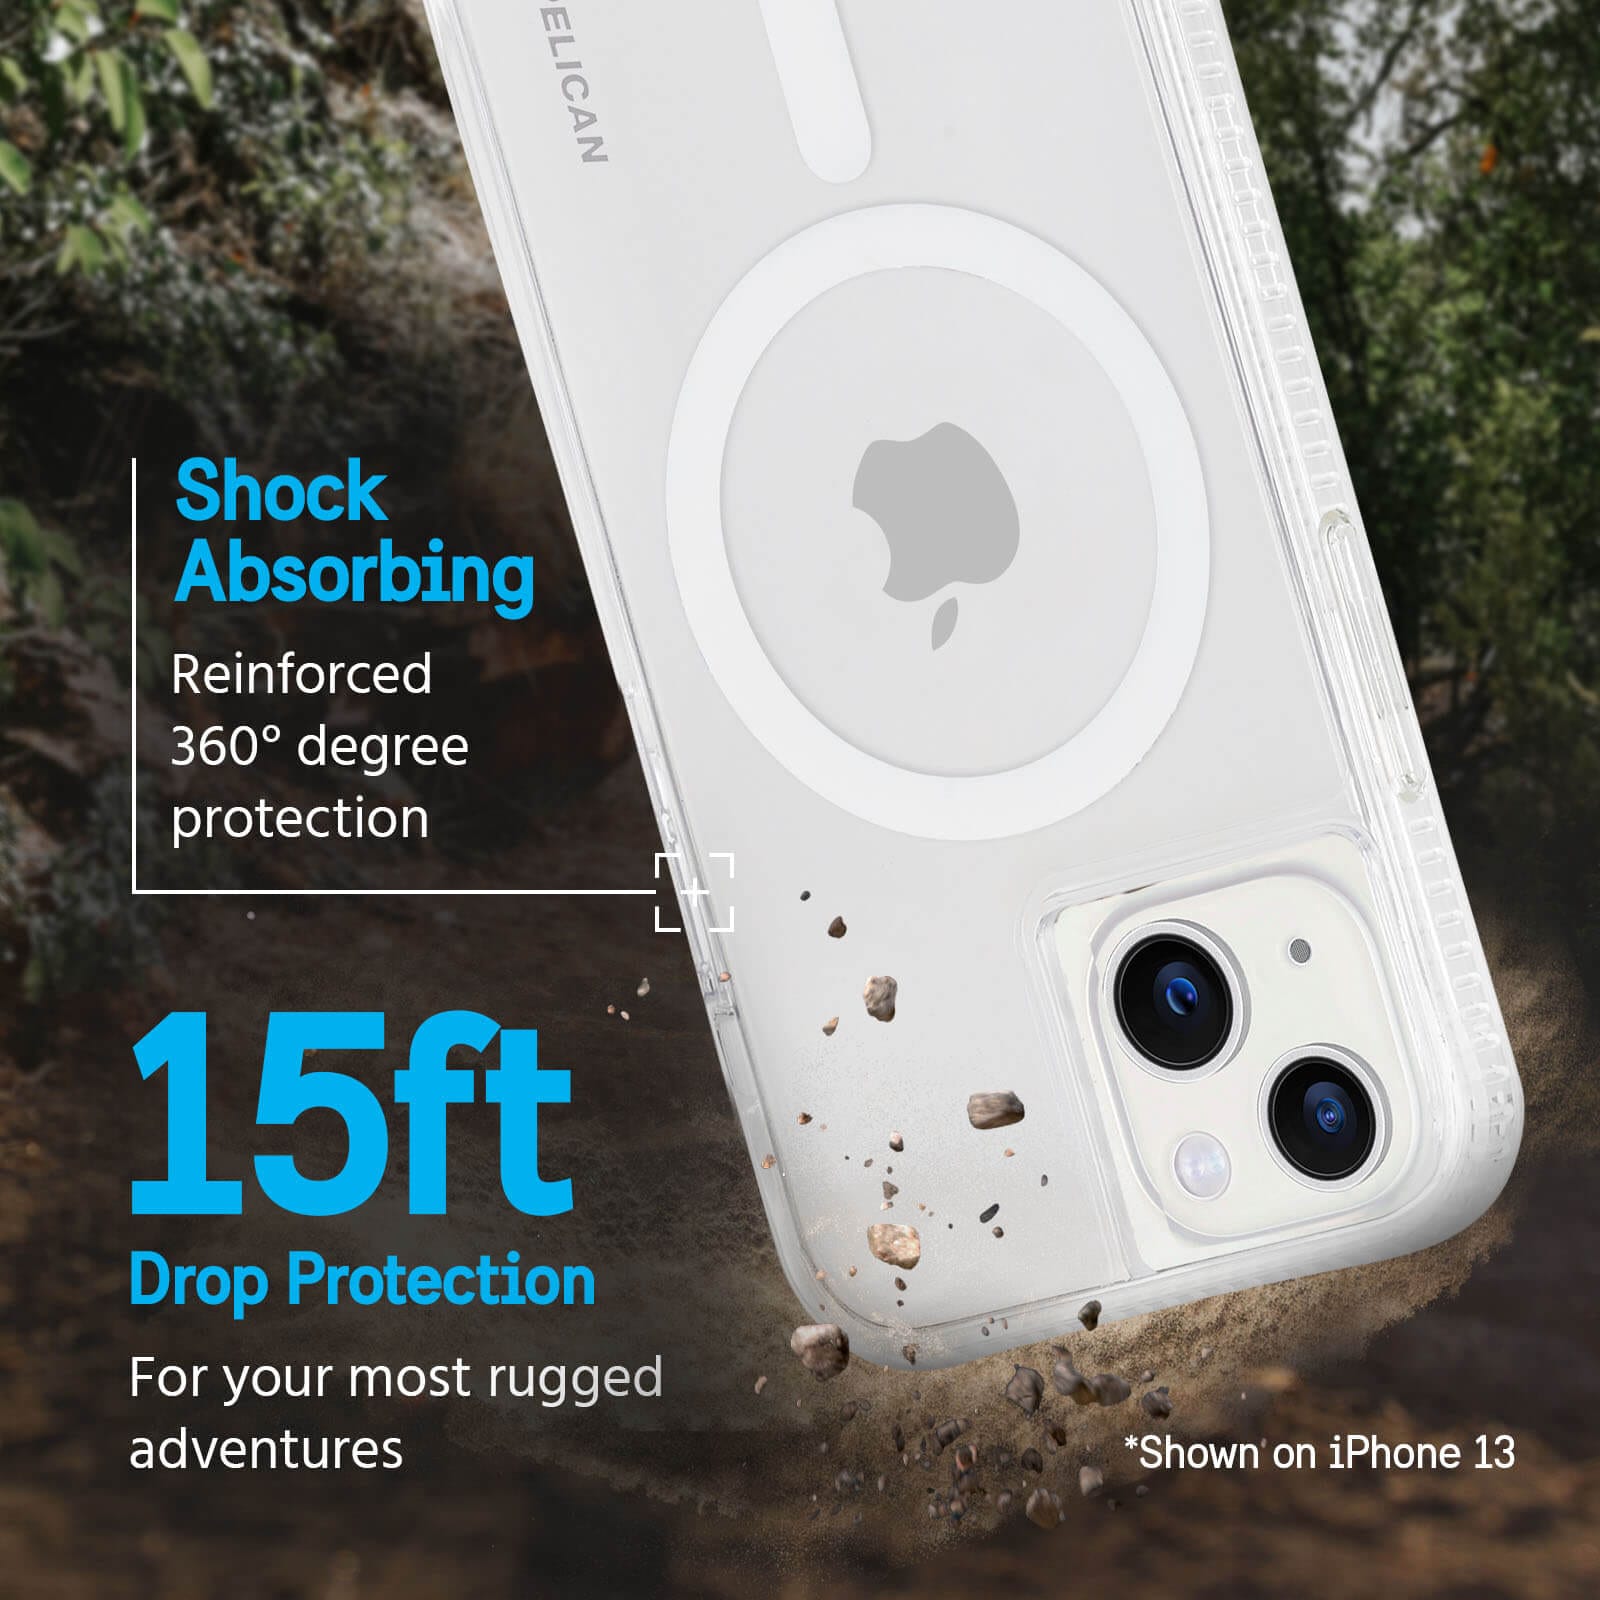 Shock absorbing reinforced 260 degree protection. 15ft drop protection for your most rugged adventures. *shown on iPhone 13. color::clear